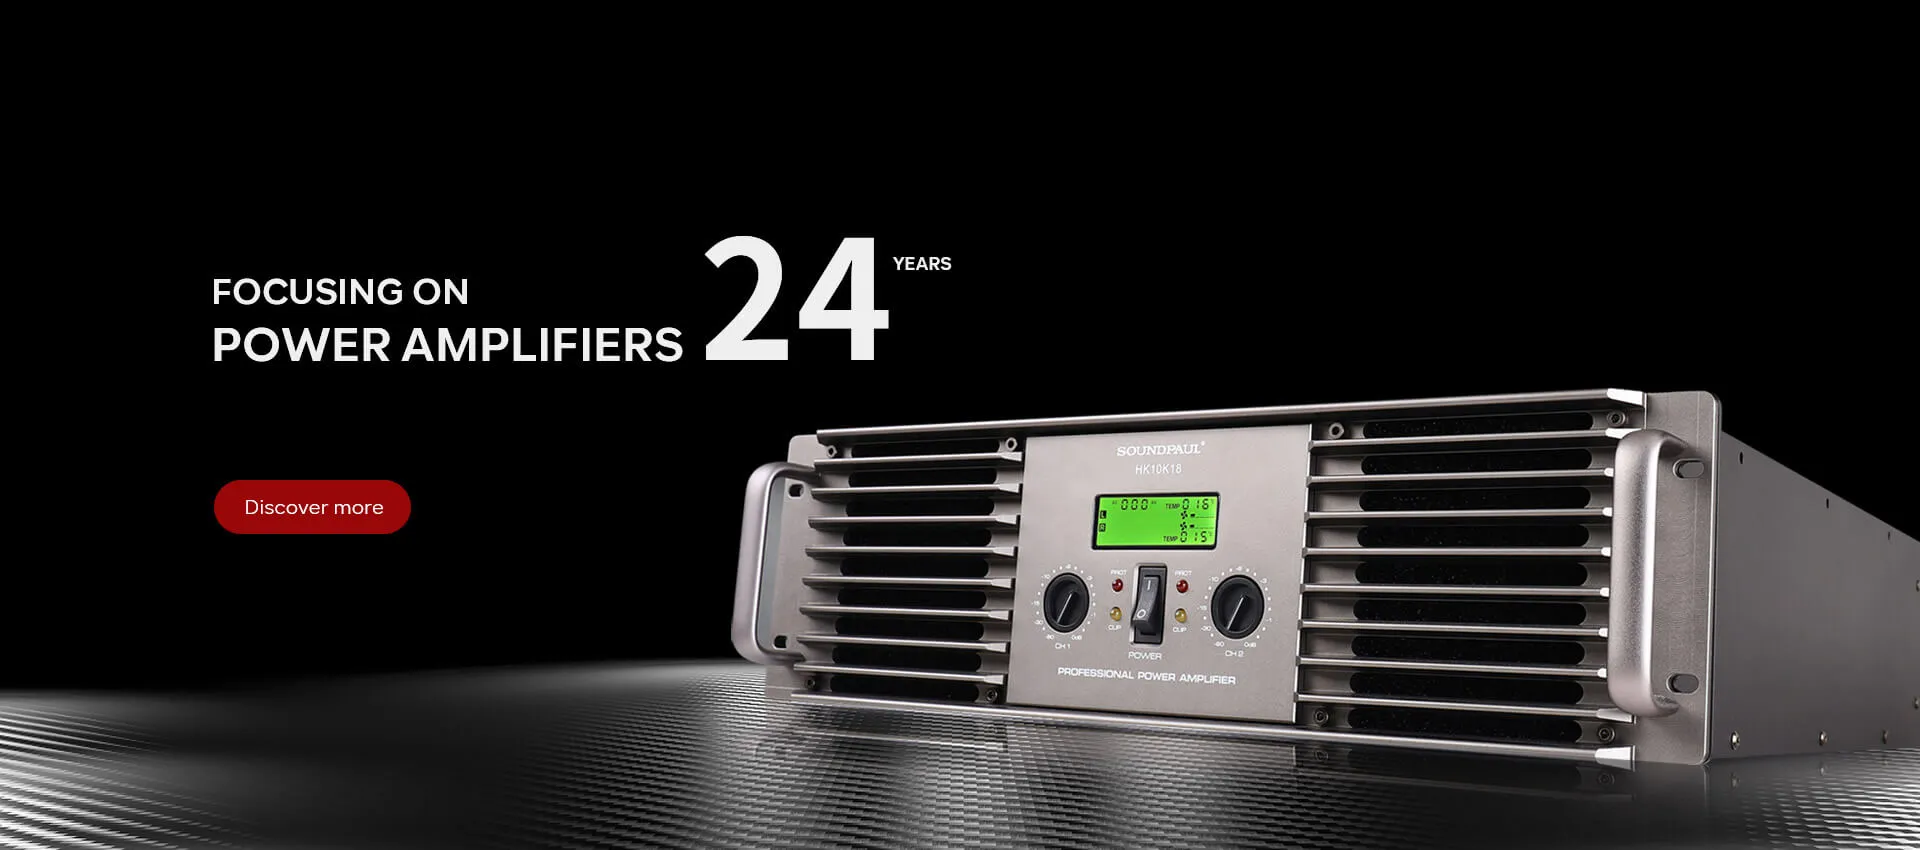 Focus on power amplifier for 24 years